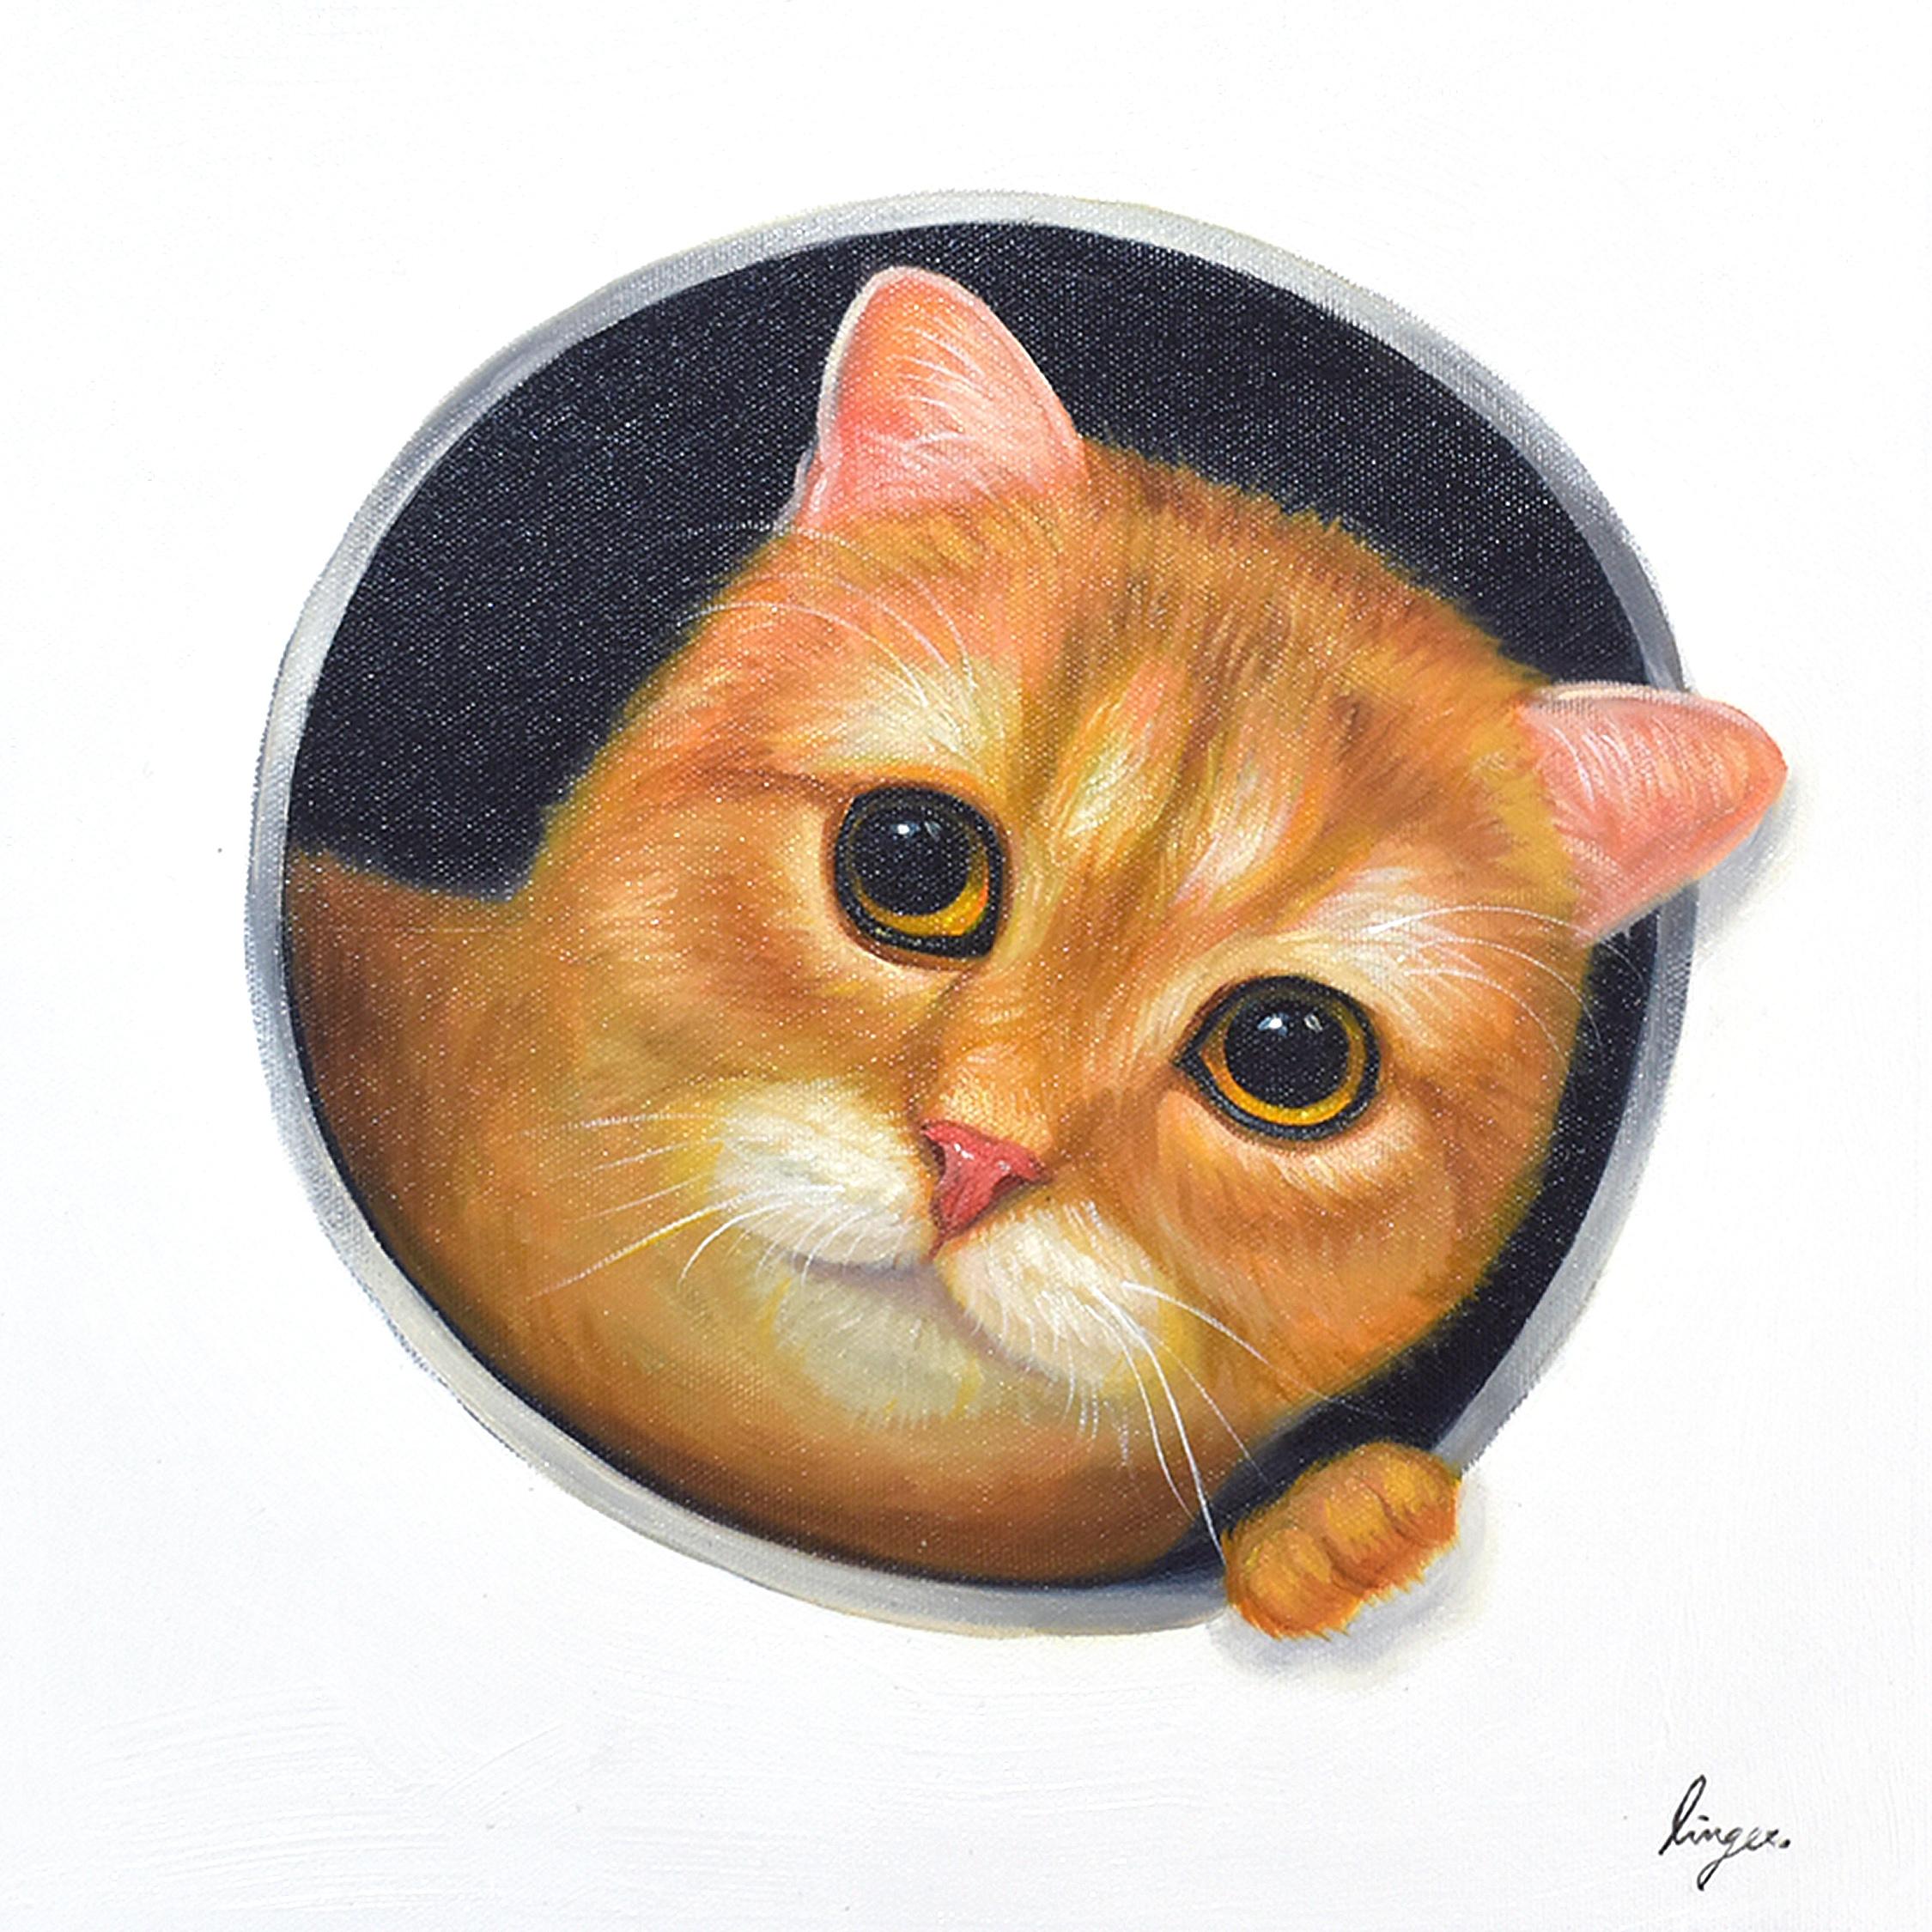 Lingee Bangkhuntod Animal Painting - Peeking Cats 8. Cat looking Through a Hole. Adorable Orange Cat Oil Painting